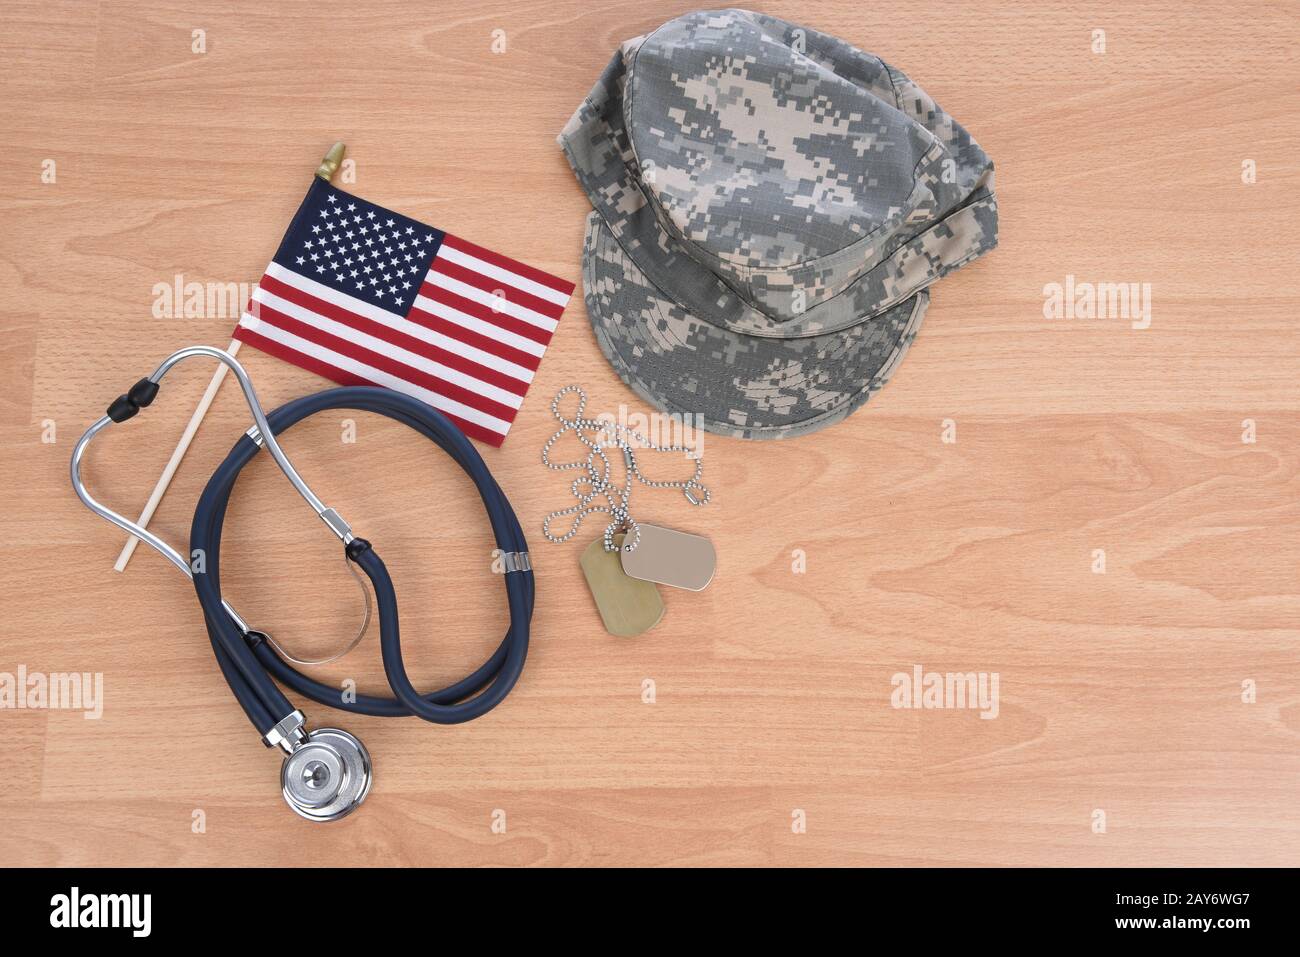 Military Health Care Concept. Light wood background with stethoscope, American flag, camo hat, and dog tags. Stock Photo